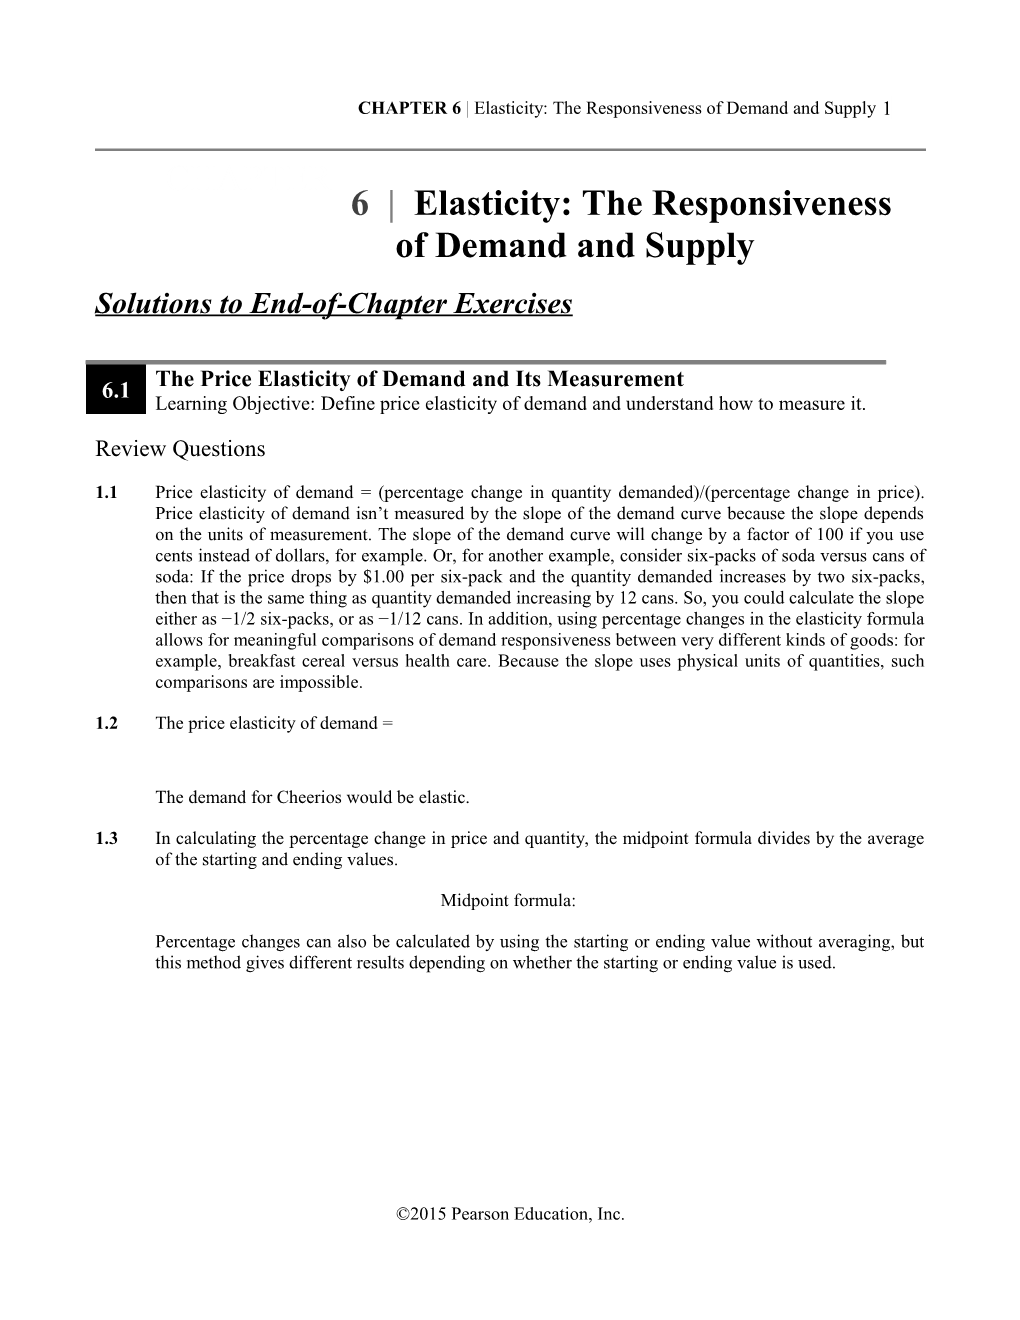 CHAPTER 6 Elasticity: the Responsiveness of Demand and Supply